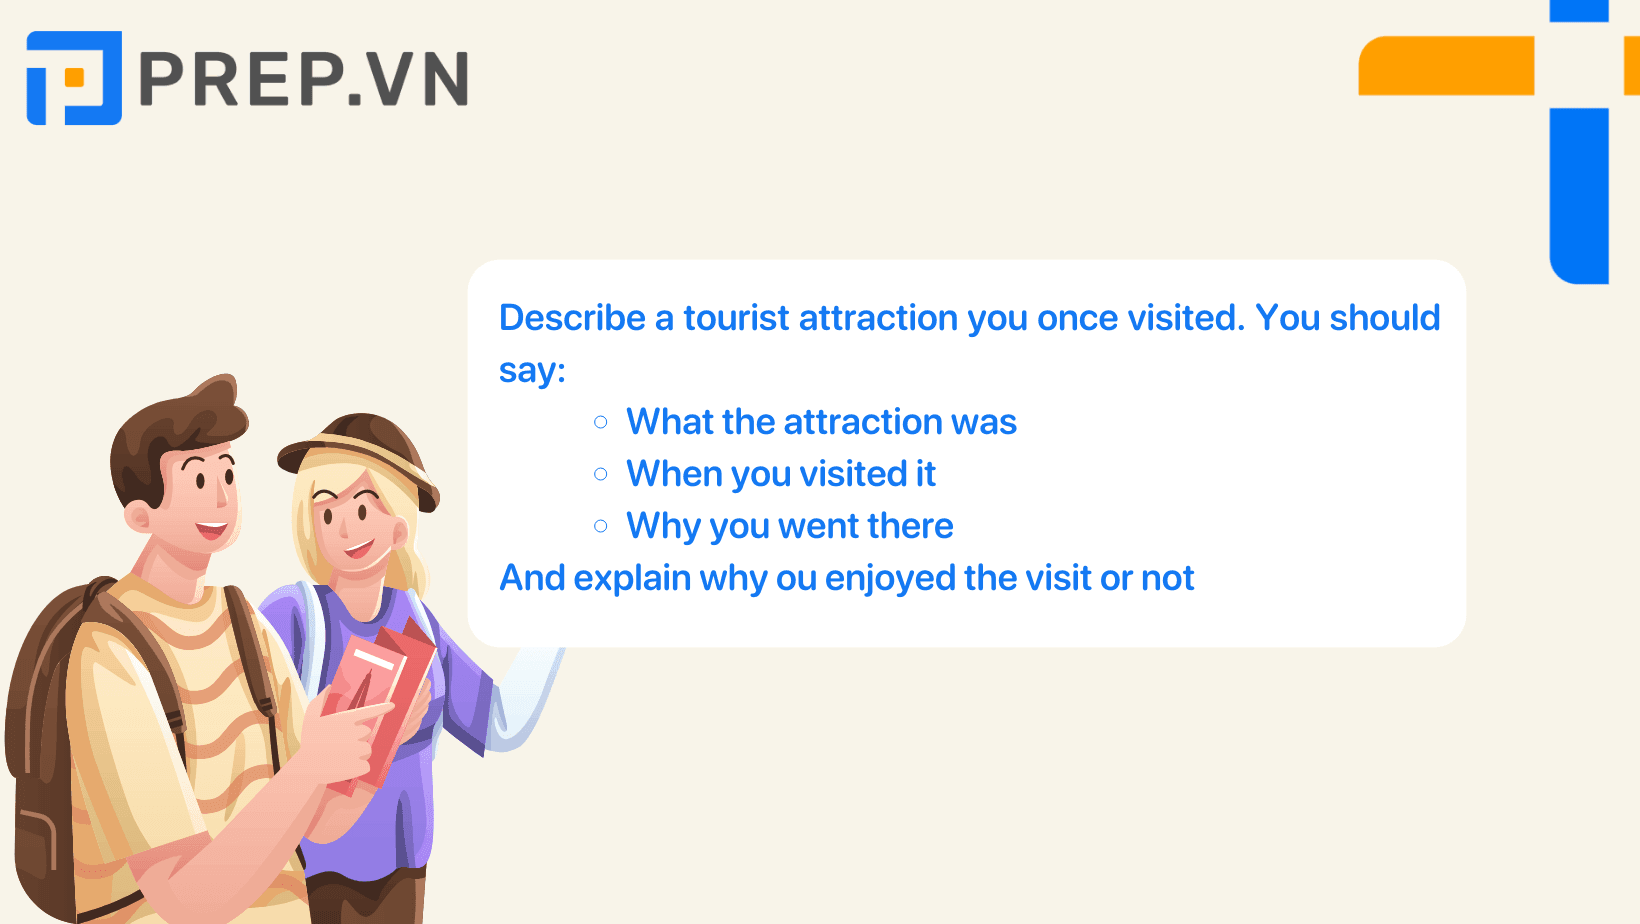 Describe a tourist attraction you once visited